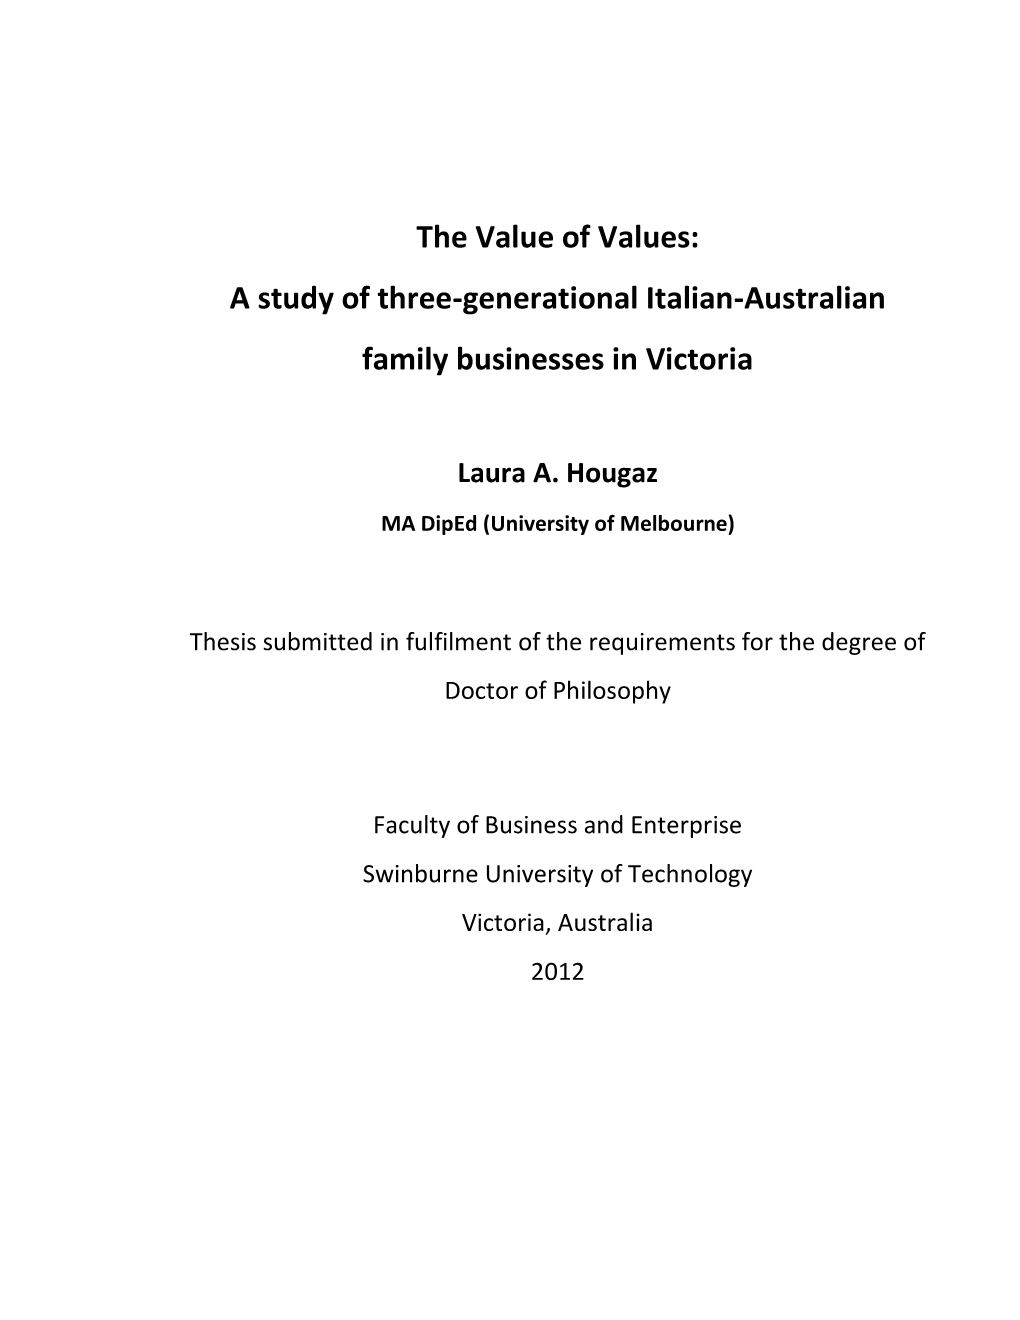 A Study of Three-Generational Italian-Australian Family Businesses in Victoria